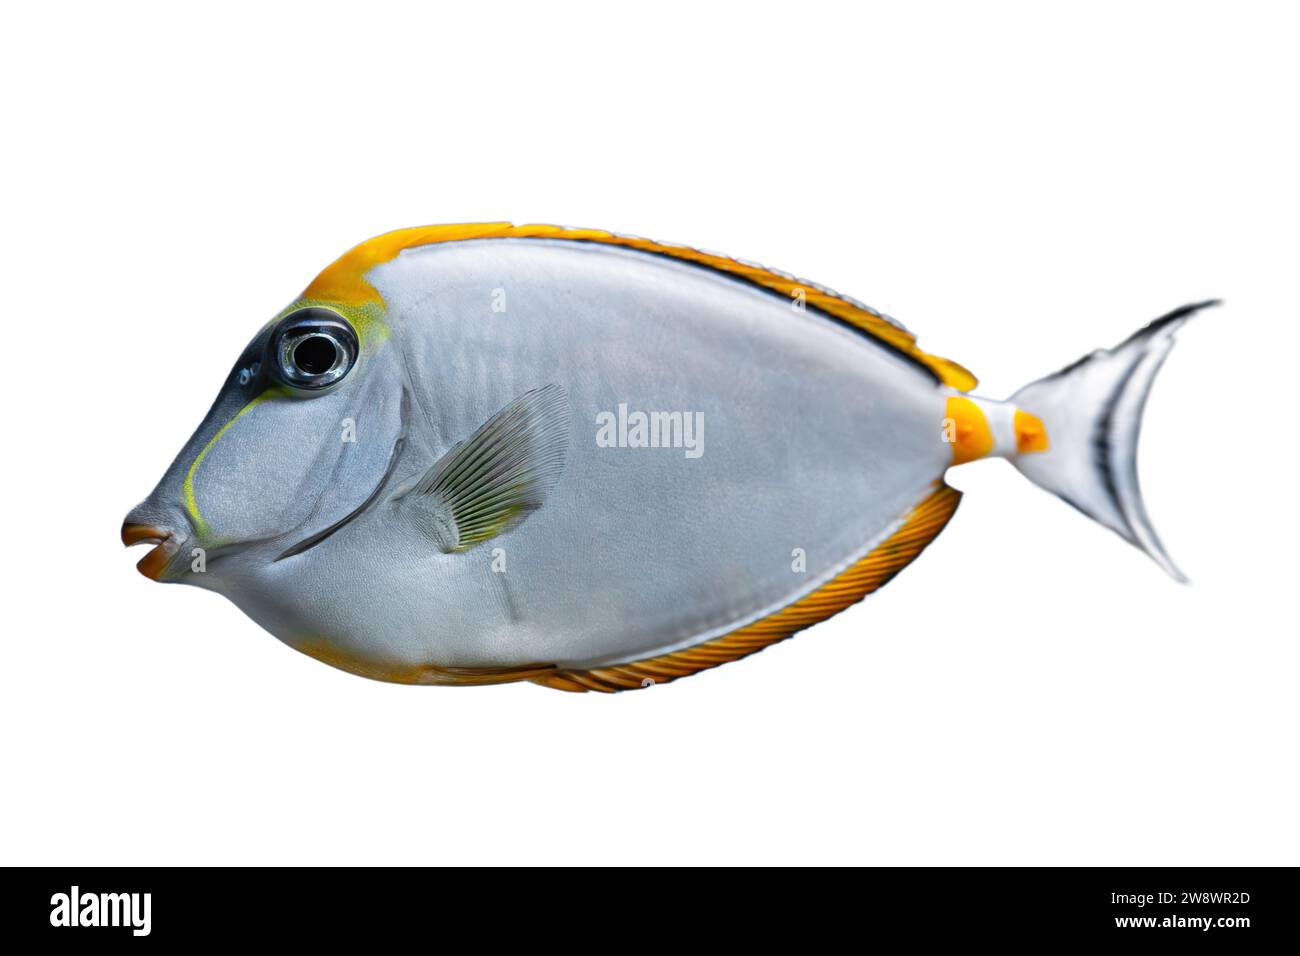 Fish blue yellow swimming Cut Out Stock Images & Pictures - Alamy